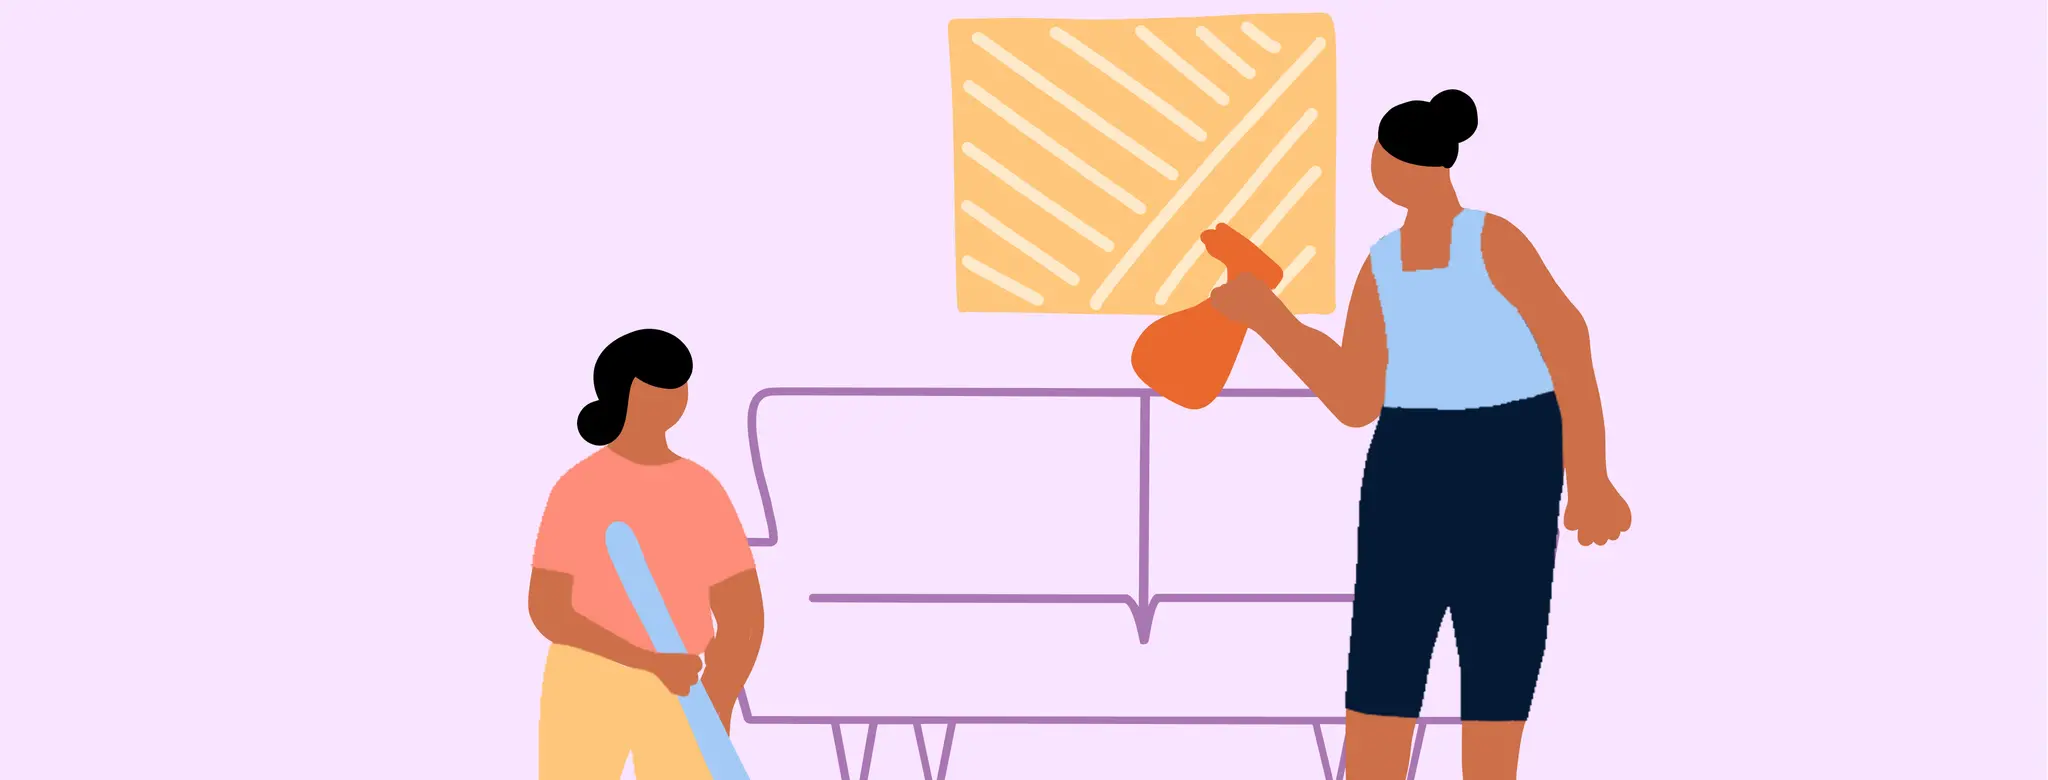 Drawing of two people cleaning a waiting area with a sofa and painting